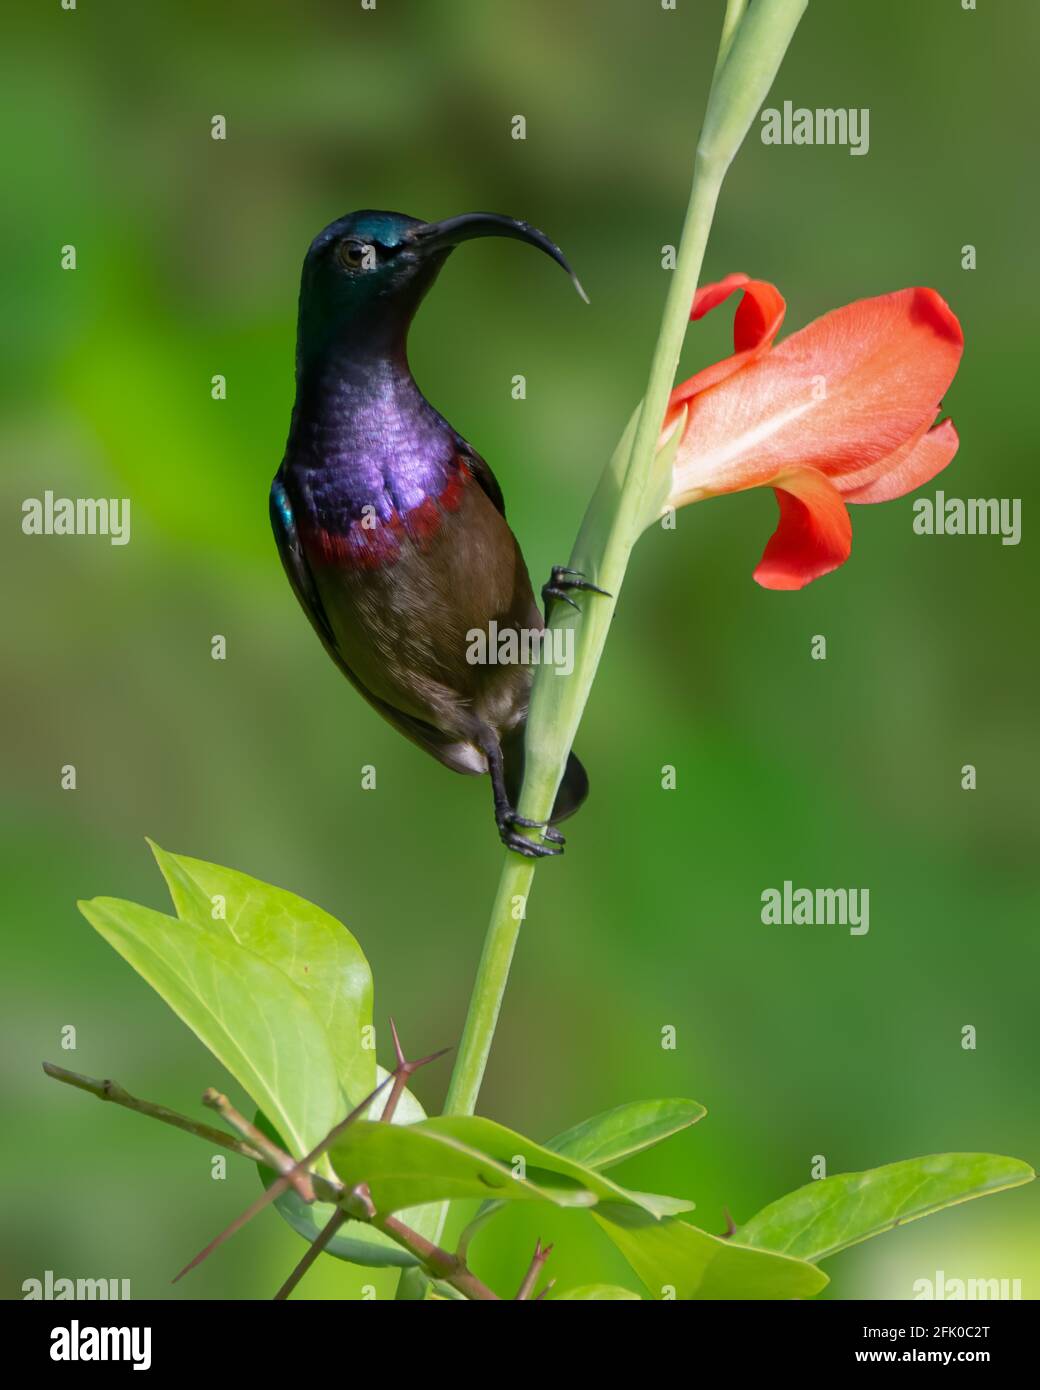 Closeup shot of a Male Loten's sunbird (Cinnyris lotenius), also known as the long-billed sunbird or maroon-breasted sunbird, is a sunbird endemic to Stock Photo